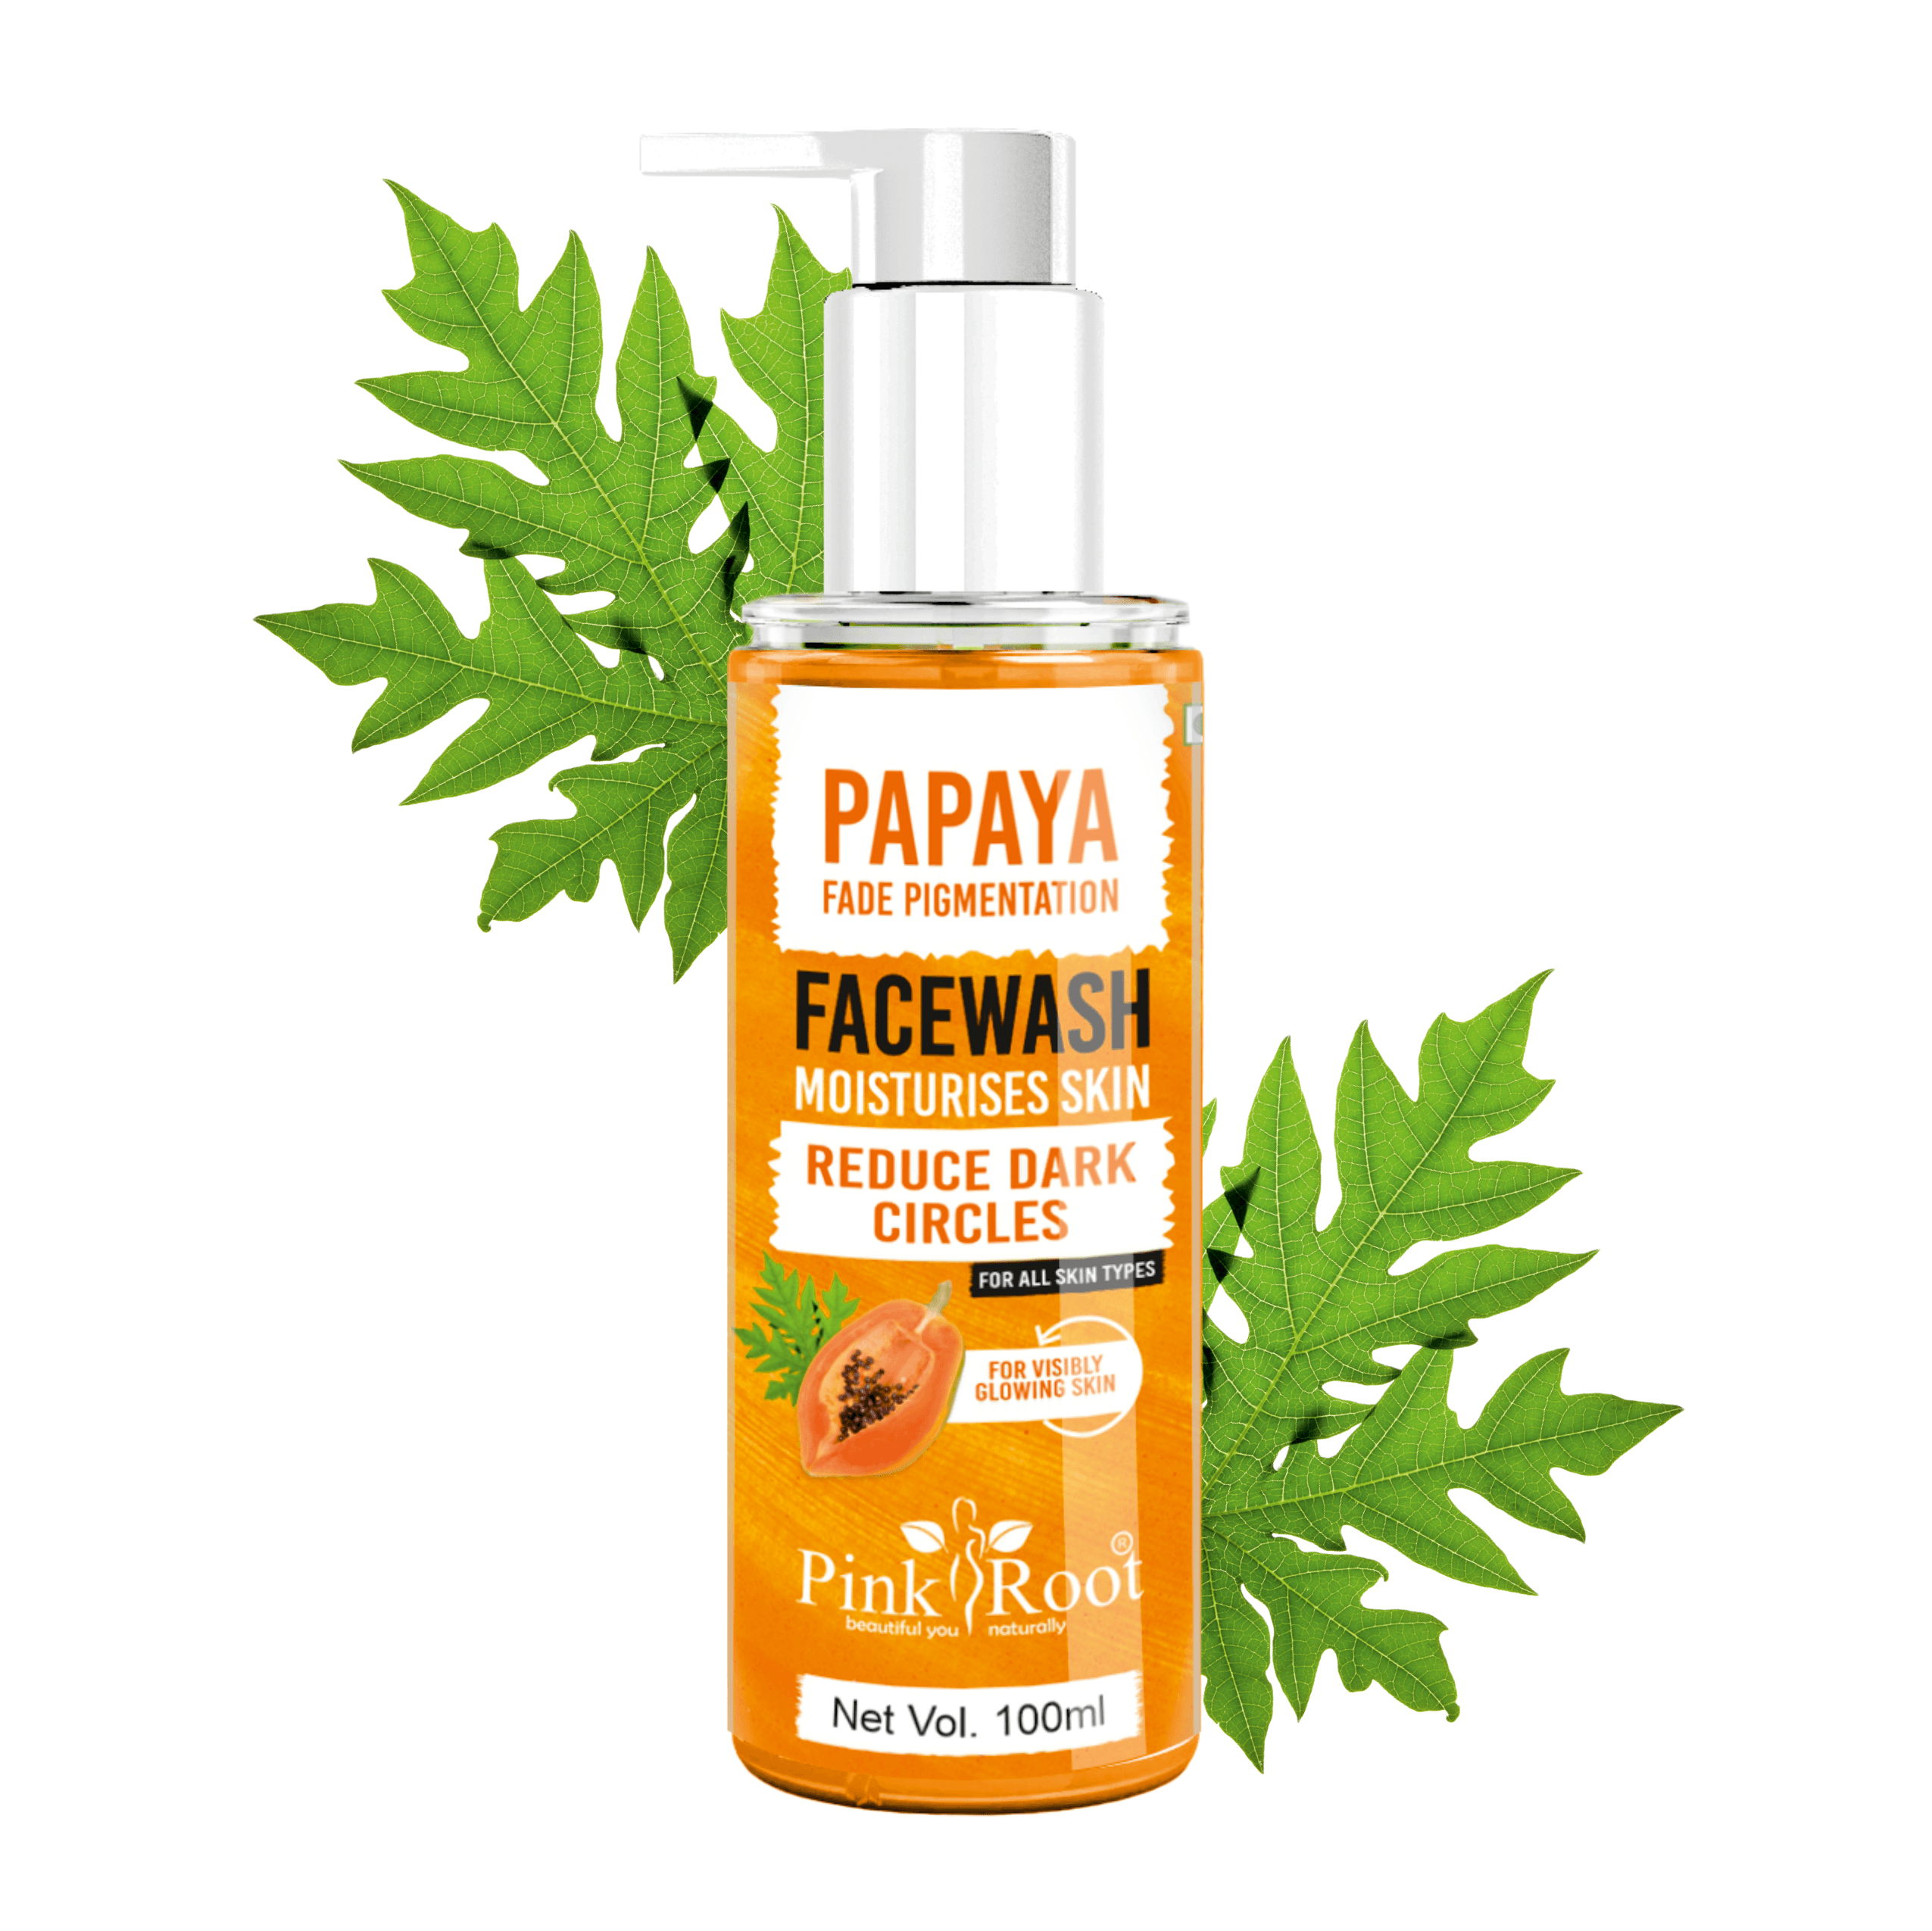 Papaya Face wash For Women/Men| Brightening and Glowing Skin|Removes Pigmentation & Dark Spots|100% Natural Papaya Fruit Enzymes|For All Skin Types - Pink Root